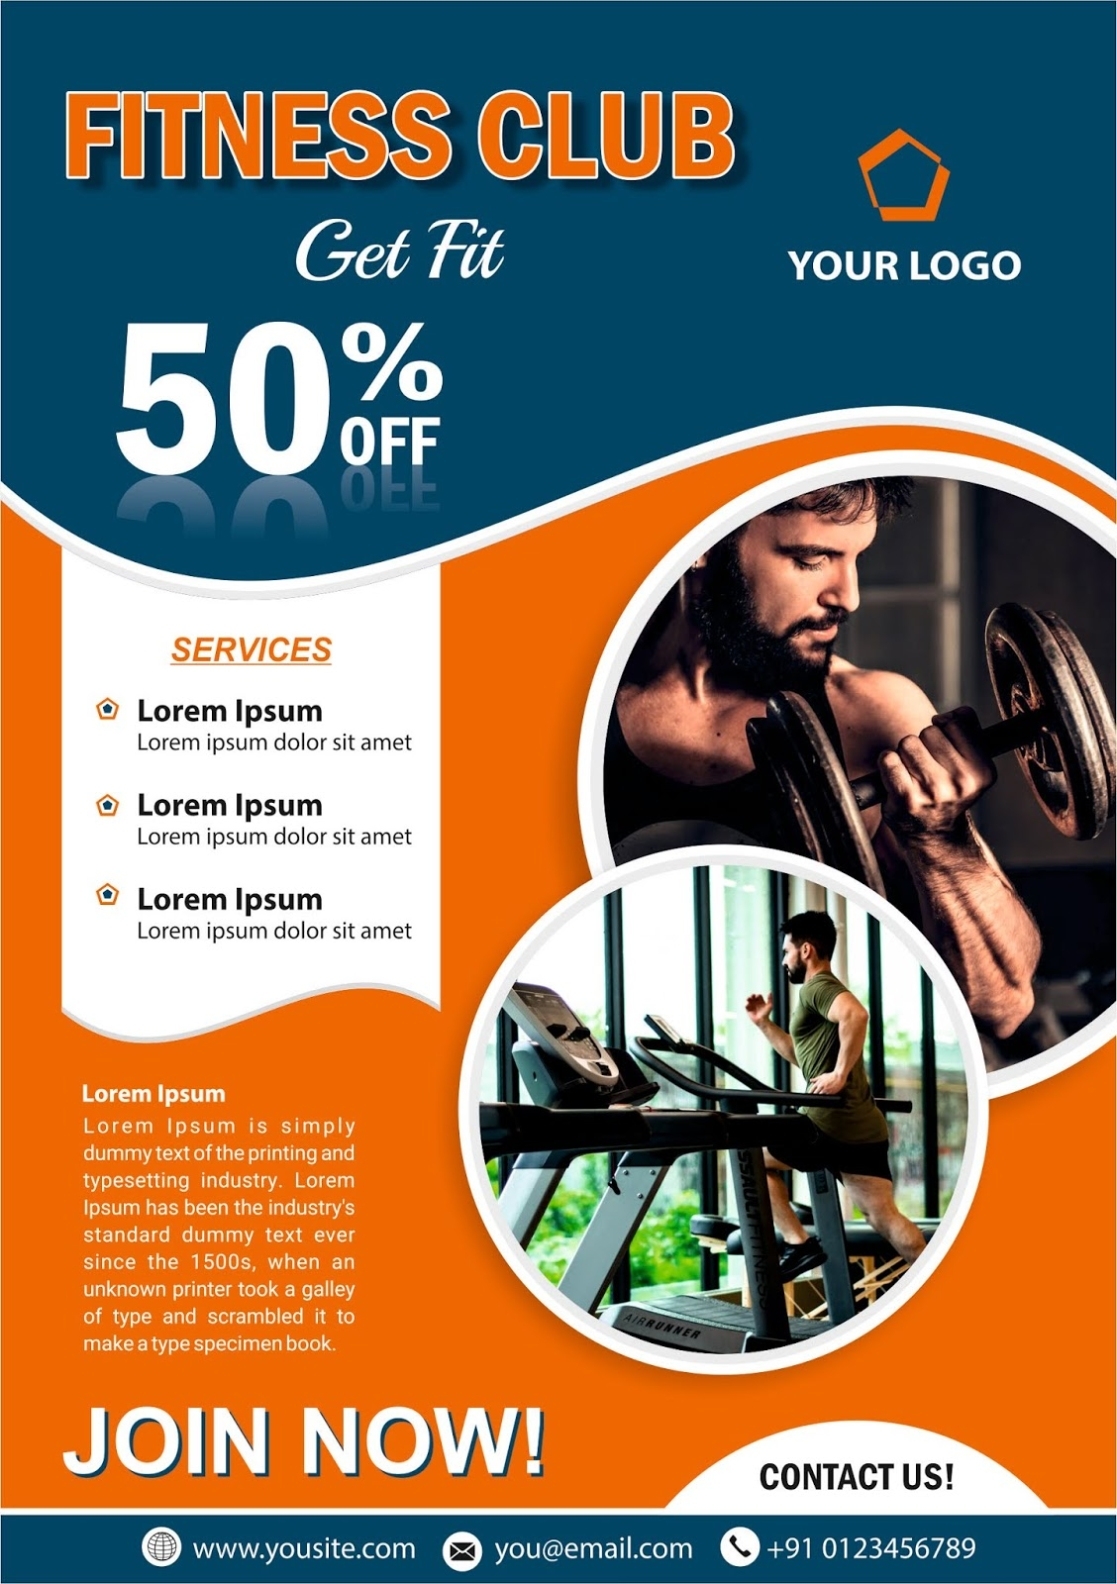 Gym Poster Flyer Design Template Cdr File Free Download | Kafeel Graphics With Regard To Templates For Flyers Free Downloads